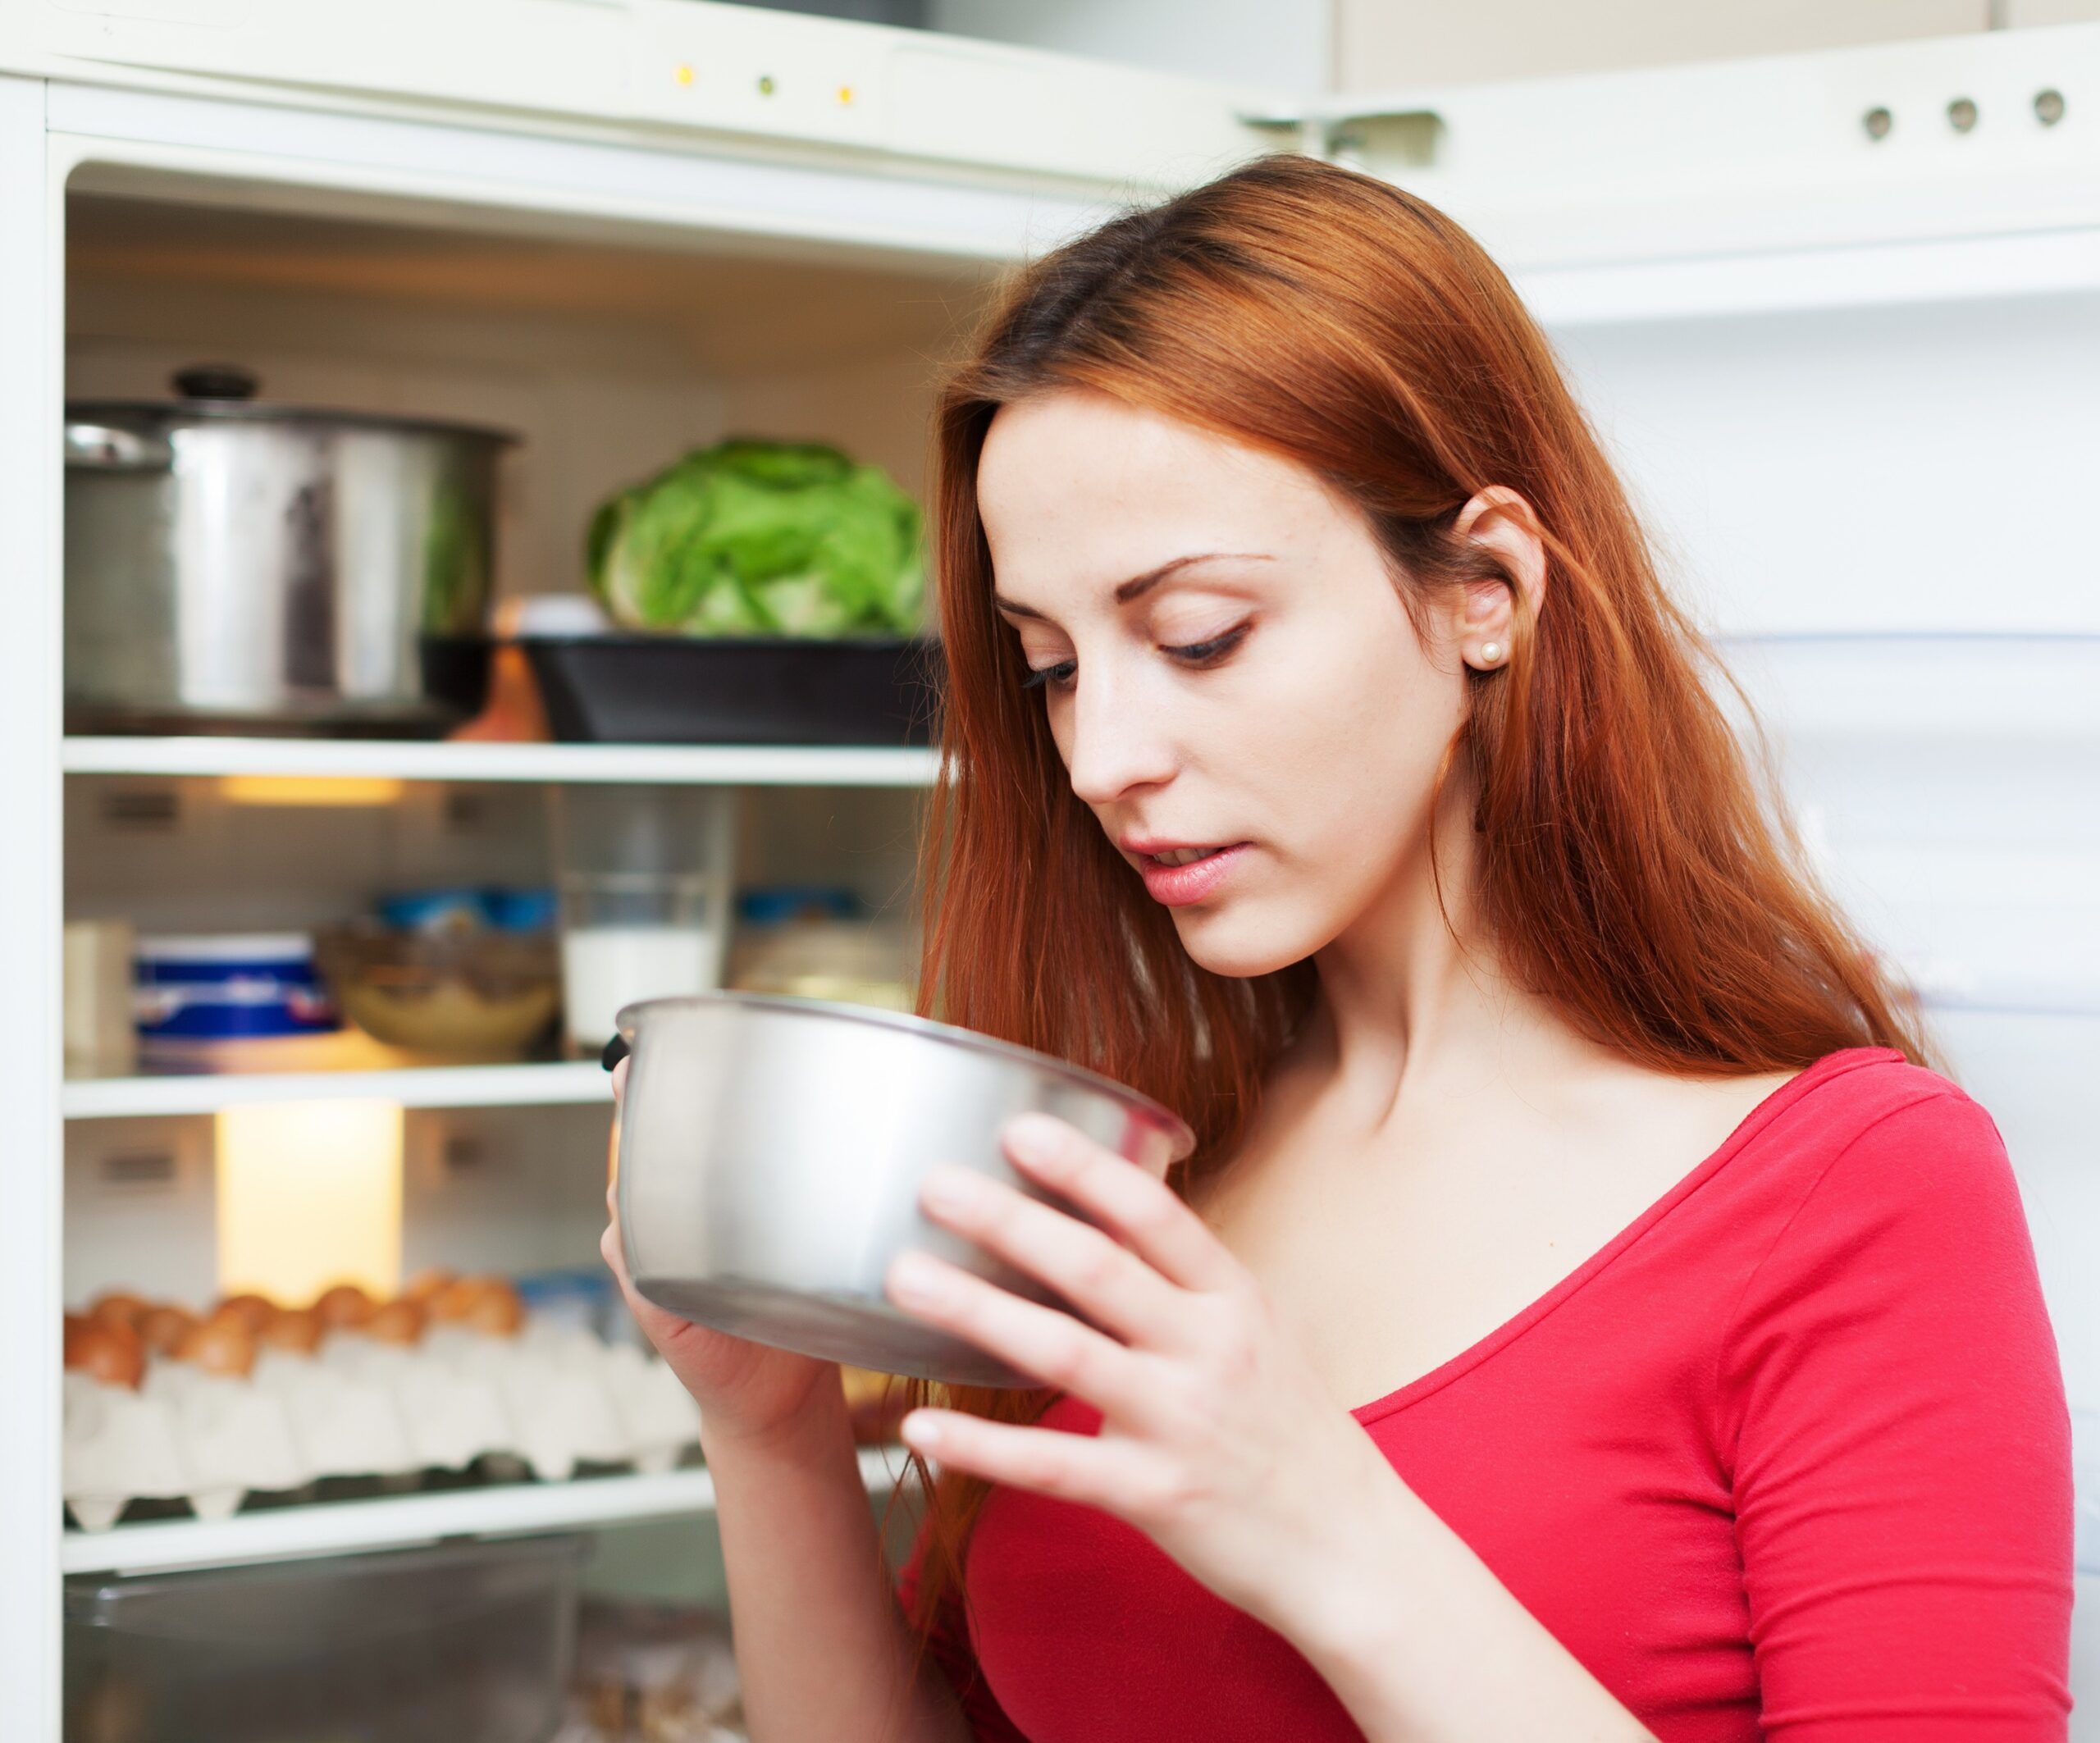 Red-haired Woman Looking For Something In Pan Near Fridge At Home